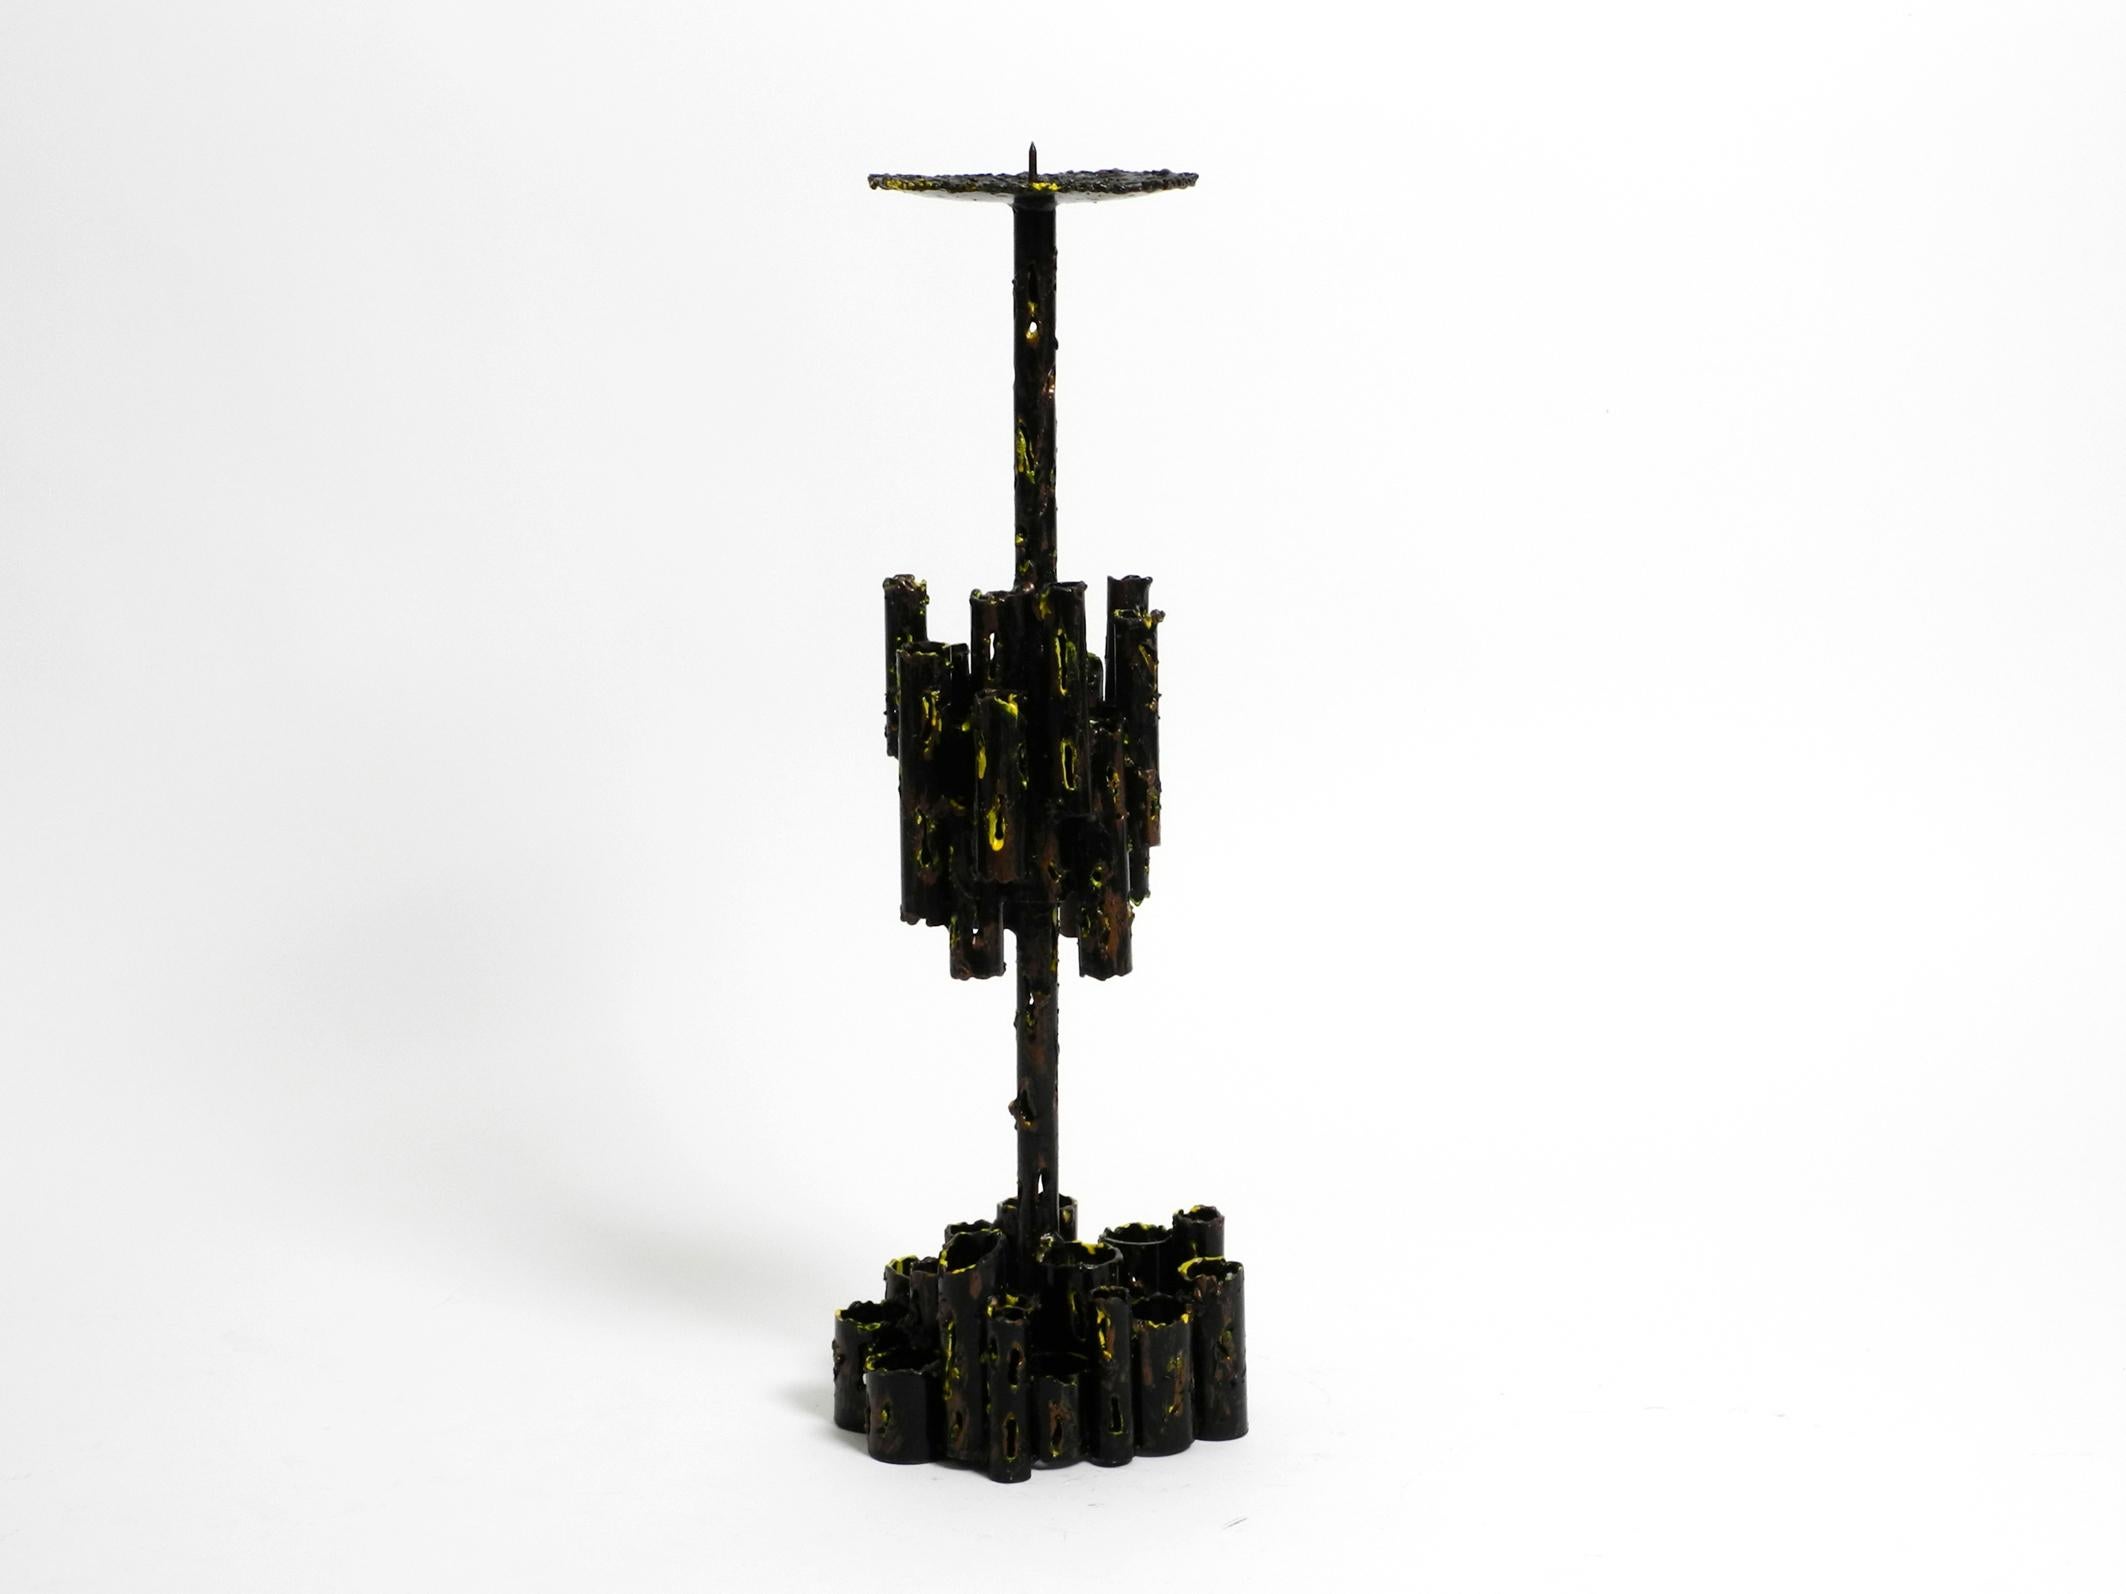 Large 1950s heavy sculptural brutalist iron candlestick by Marcello Fantoni. Made in Italy.
Great sculptural design made of black iron pipes in various lengths, painted in light brown and small yellow paint details.
No damage to the candlestick. No